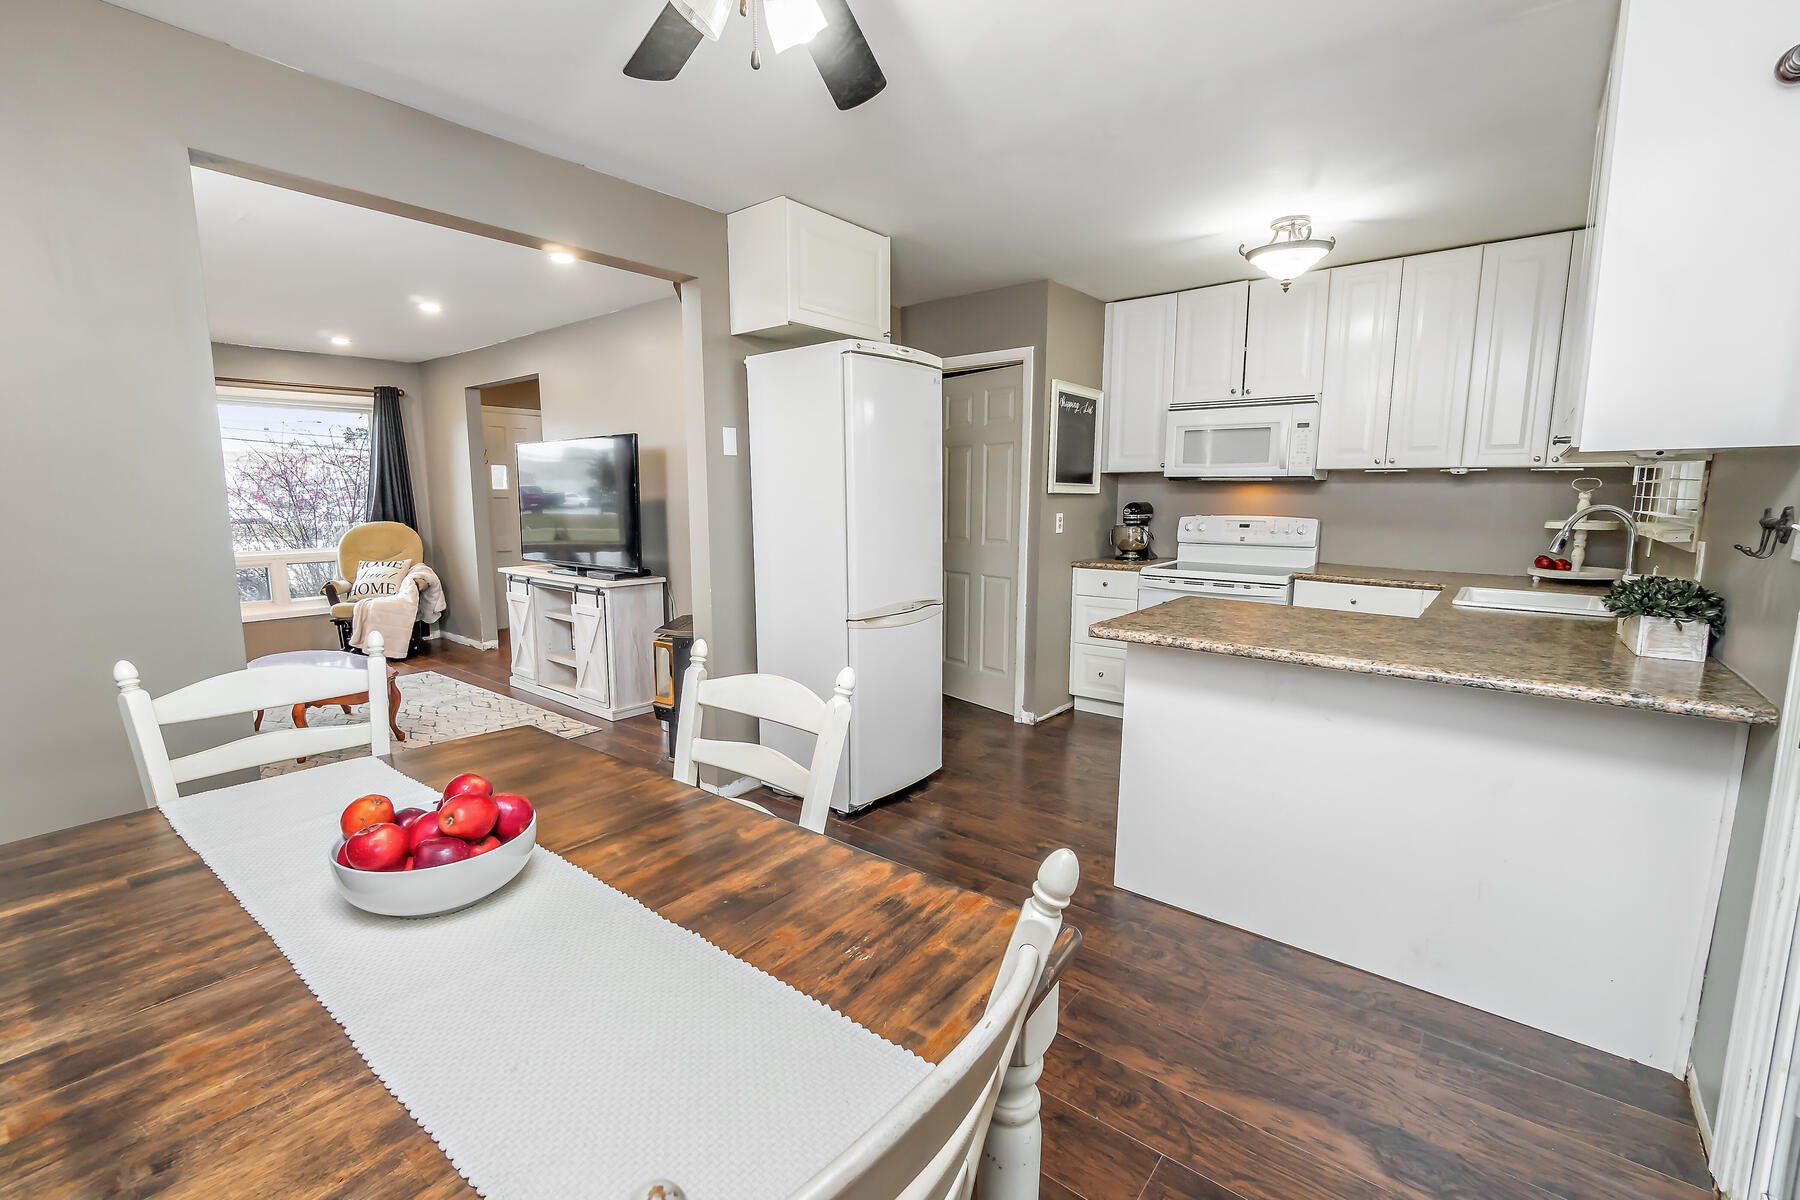 20 Mountainview Rd S Unit 30 Halton Hills ON L7G 4K3 Canada-021-014-Eating Area-MLS_Size.jpg